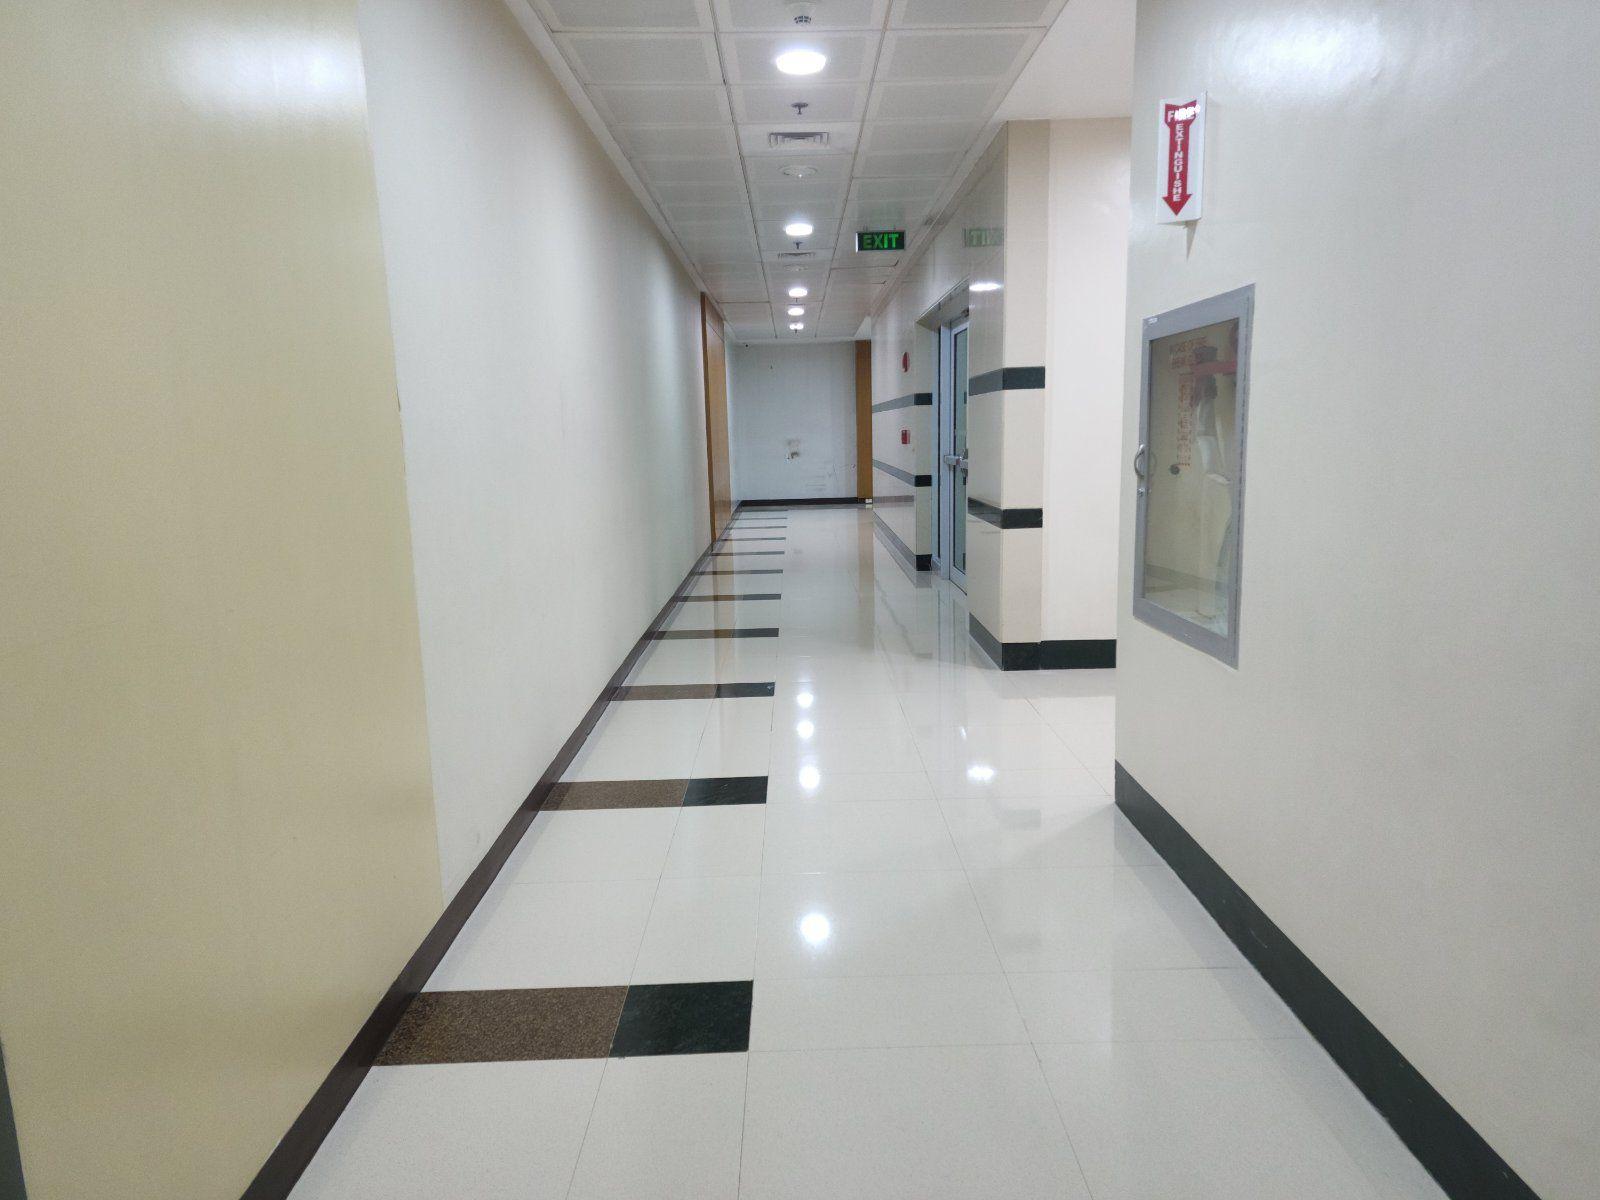 1000 sqm Fitted Office Space Lease Rent Alabang Muntinlupa Philippines